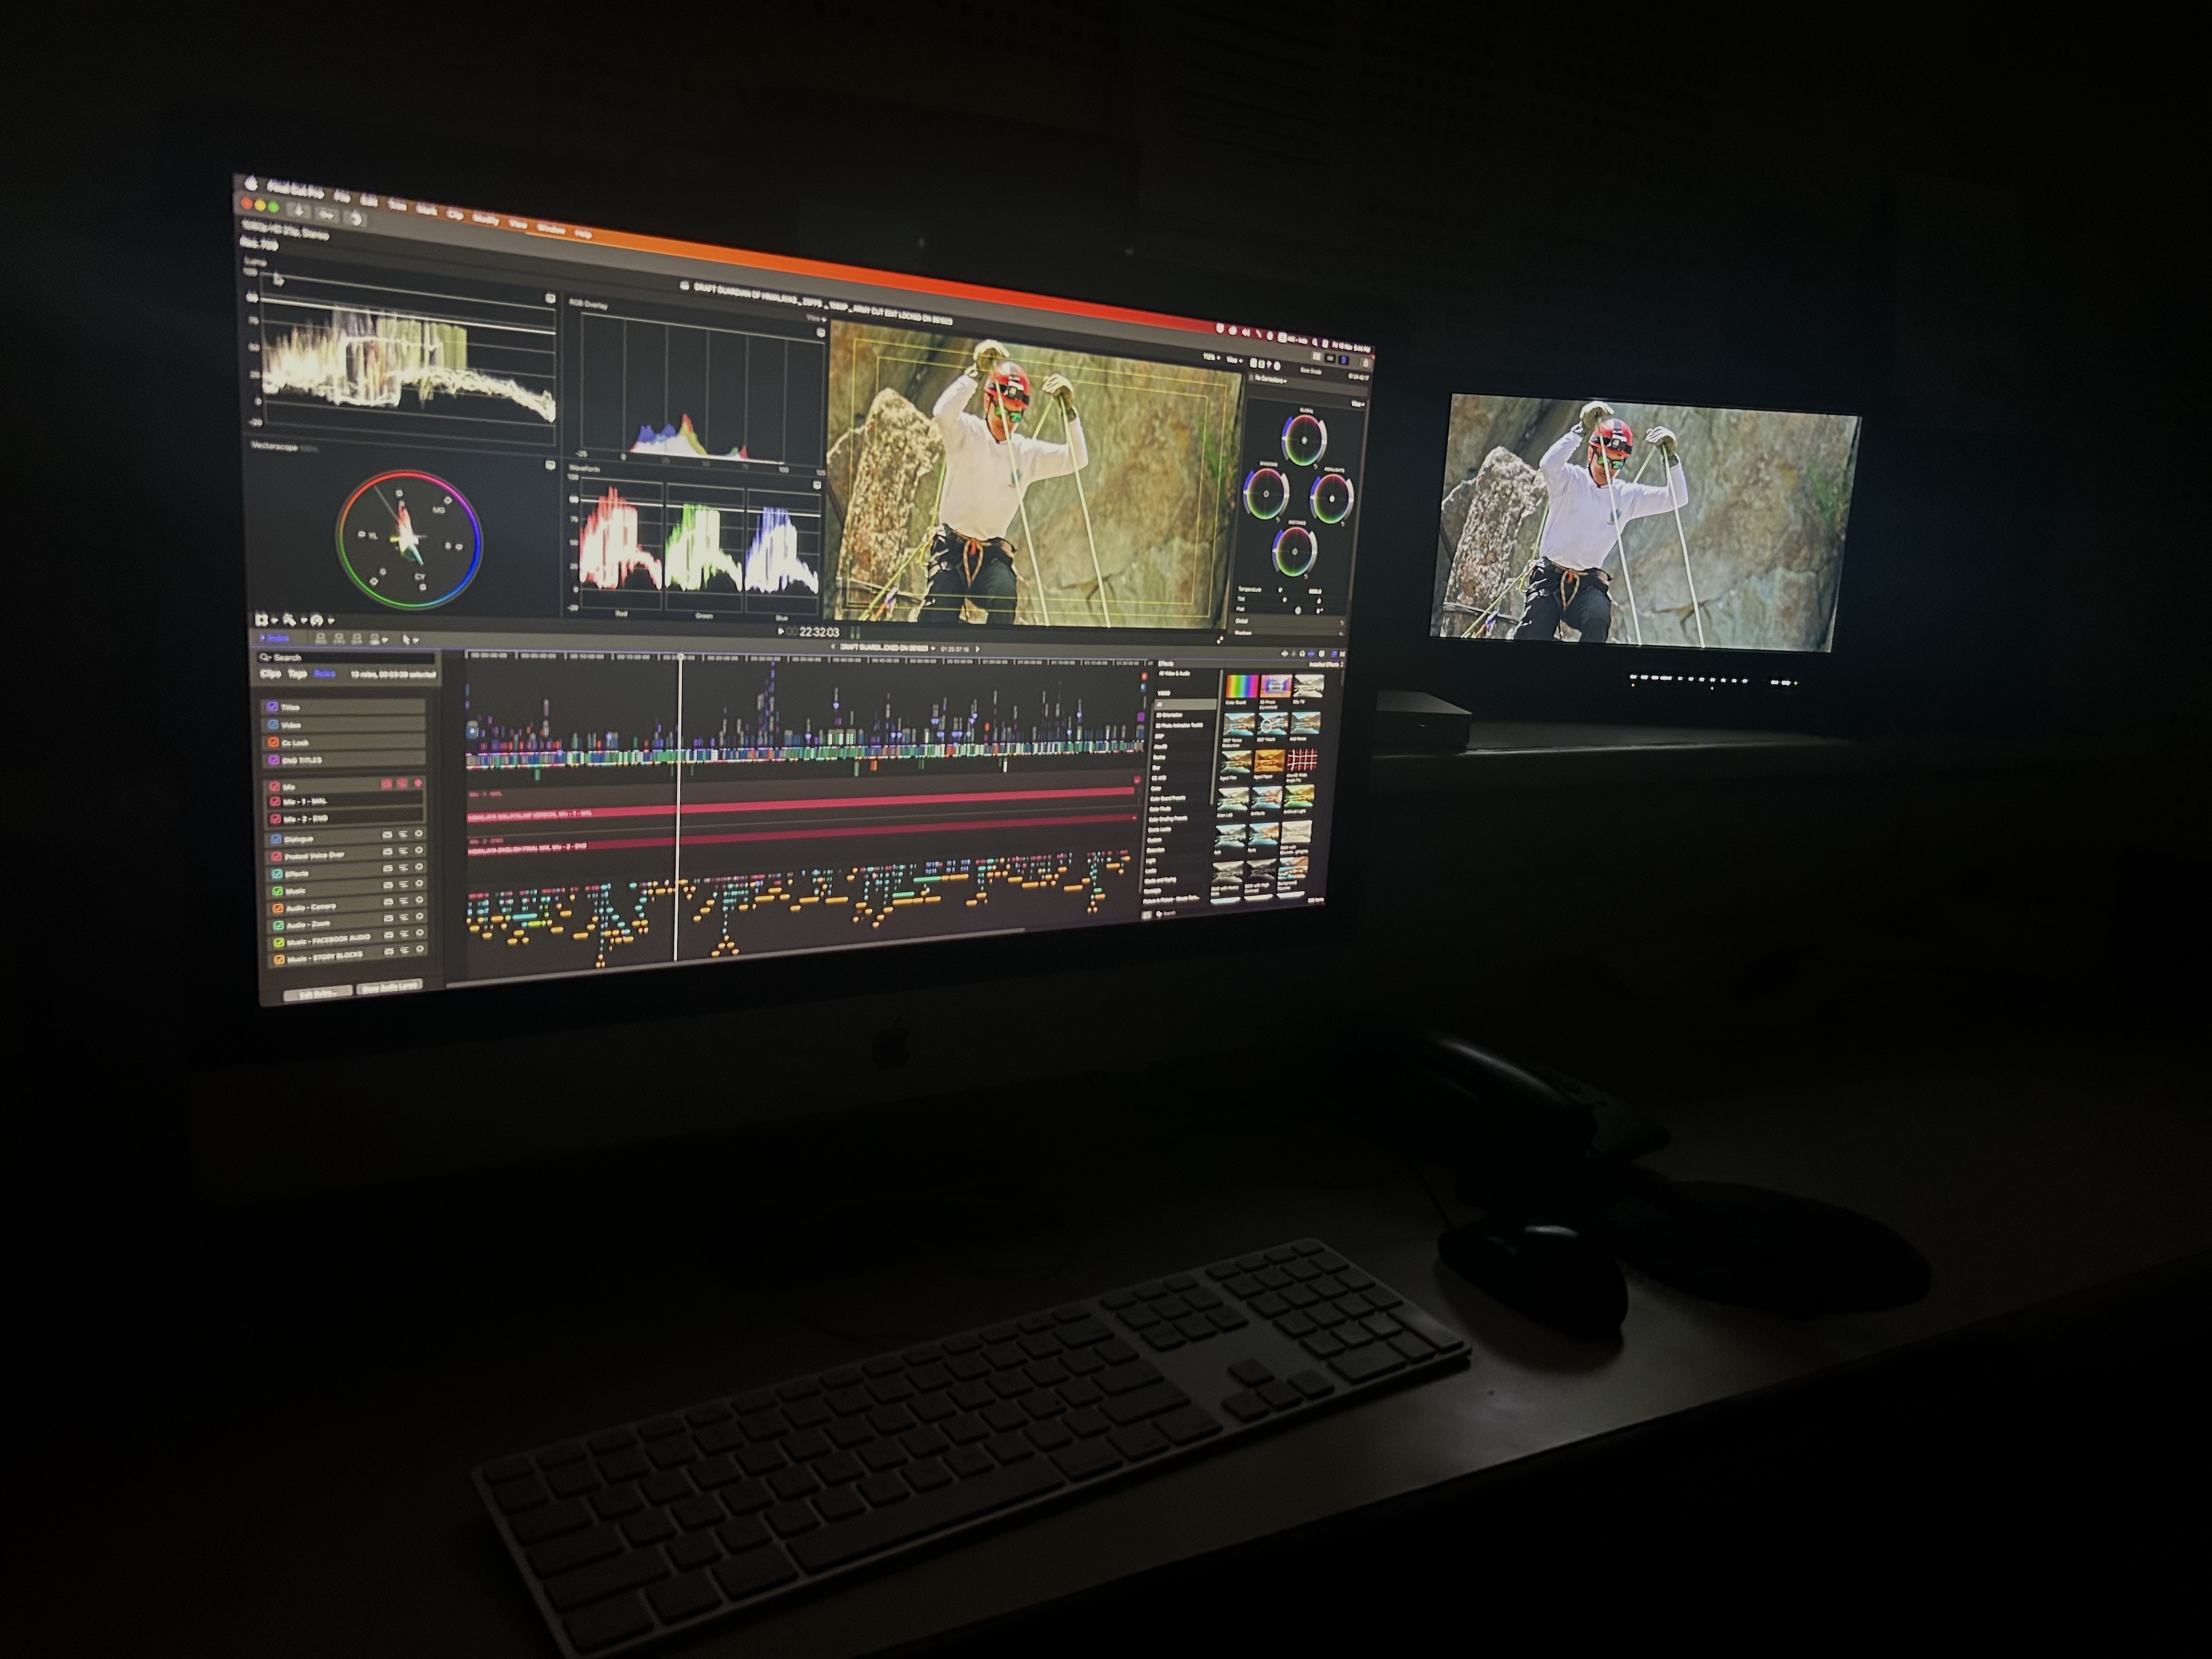 Colour Grading using Final Cut Pro with Built in tools